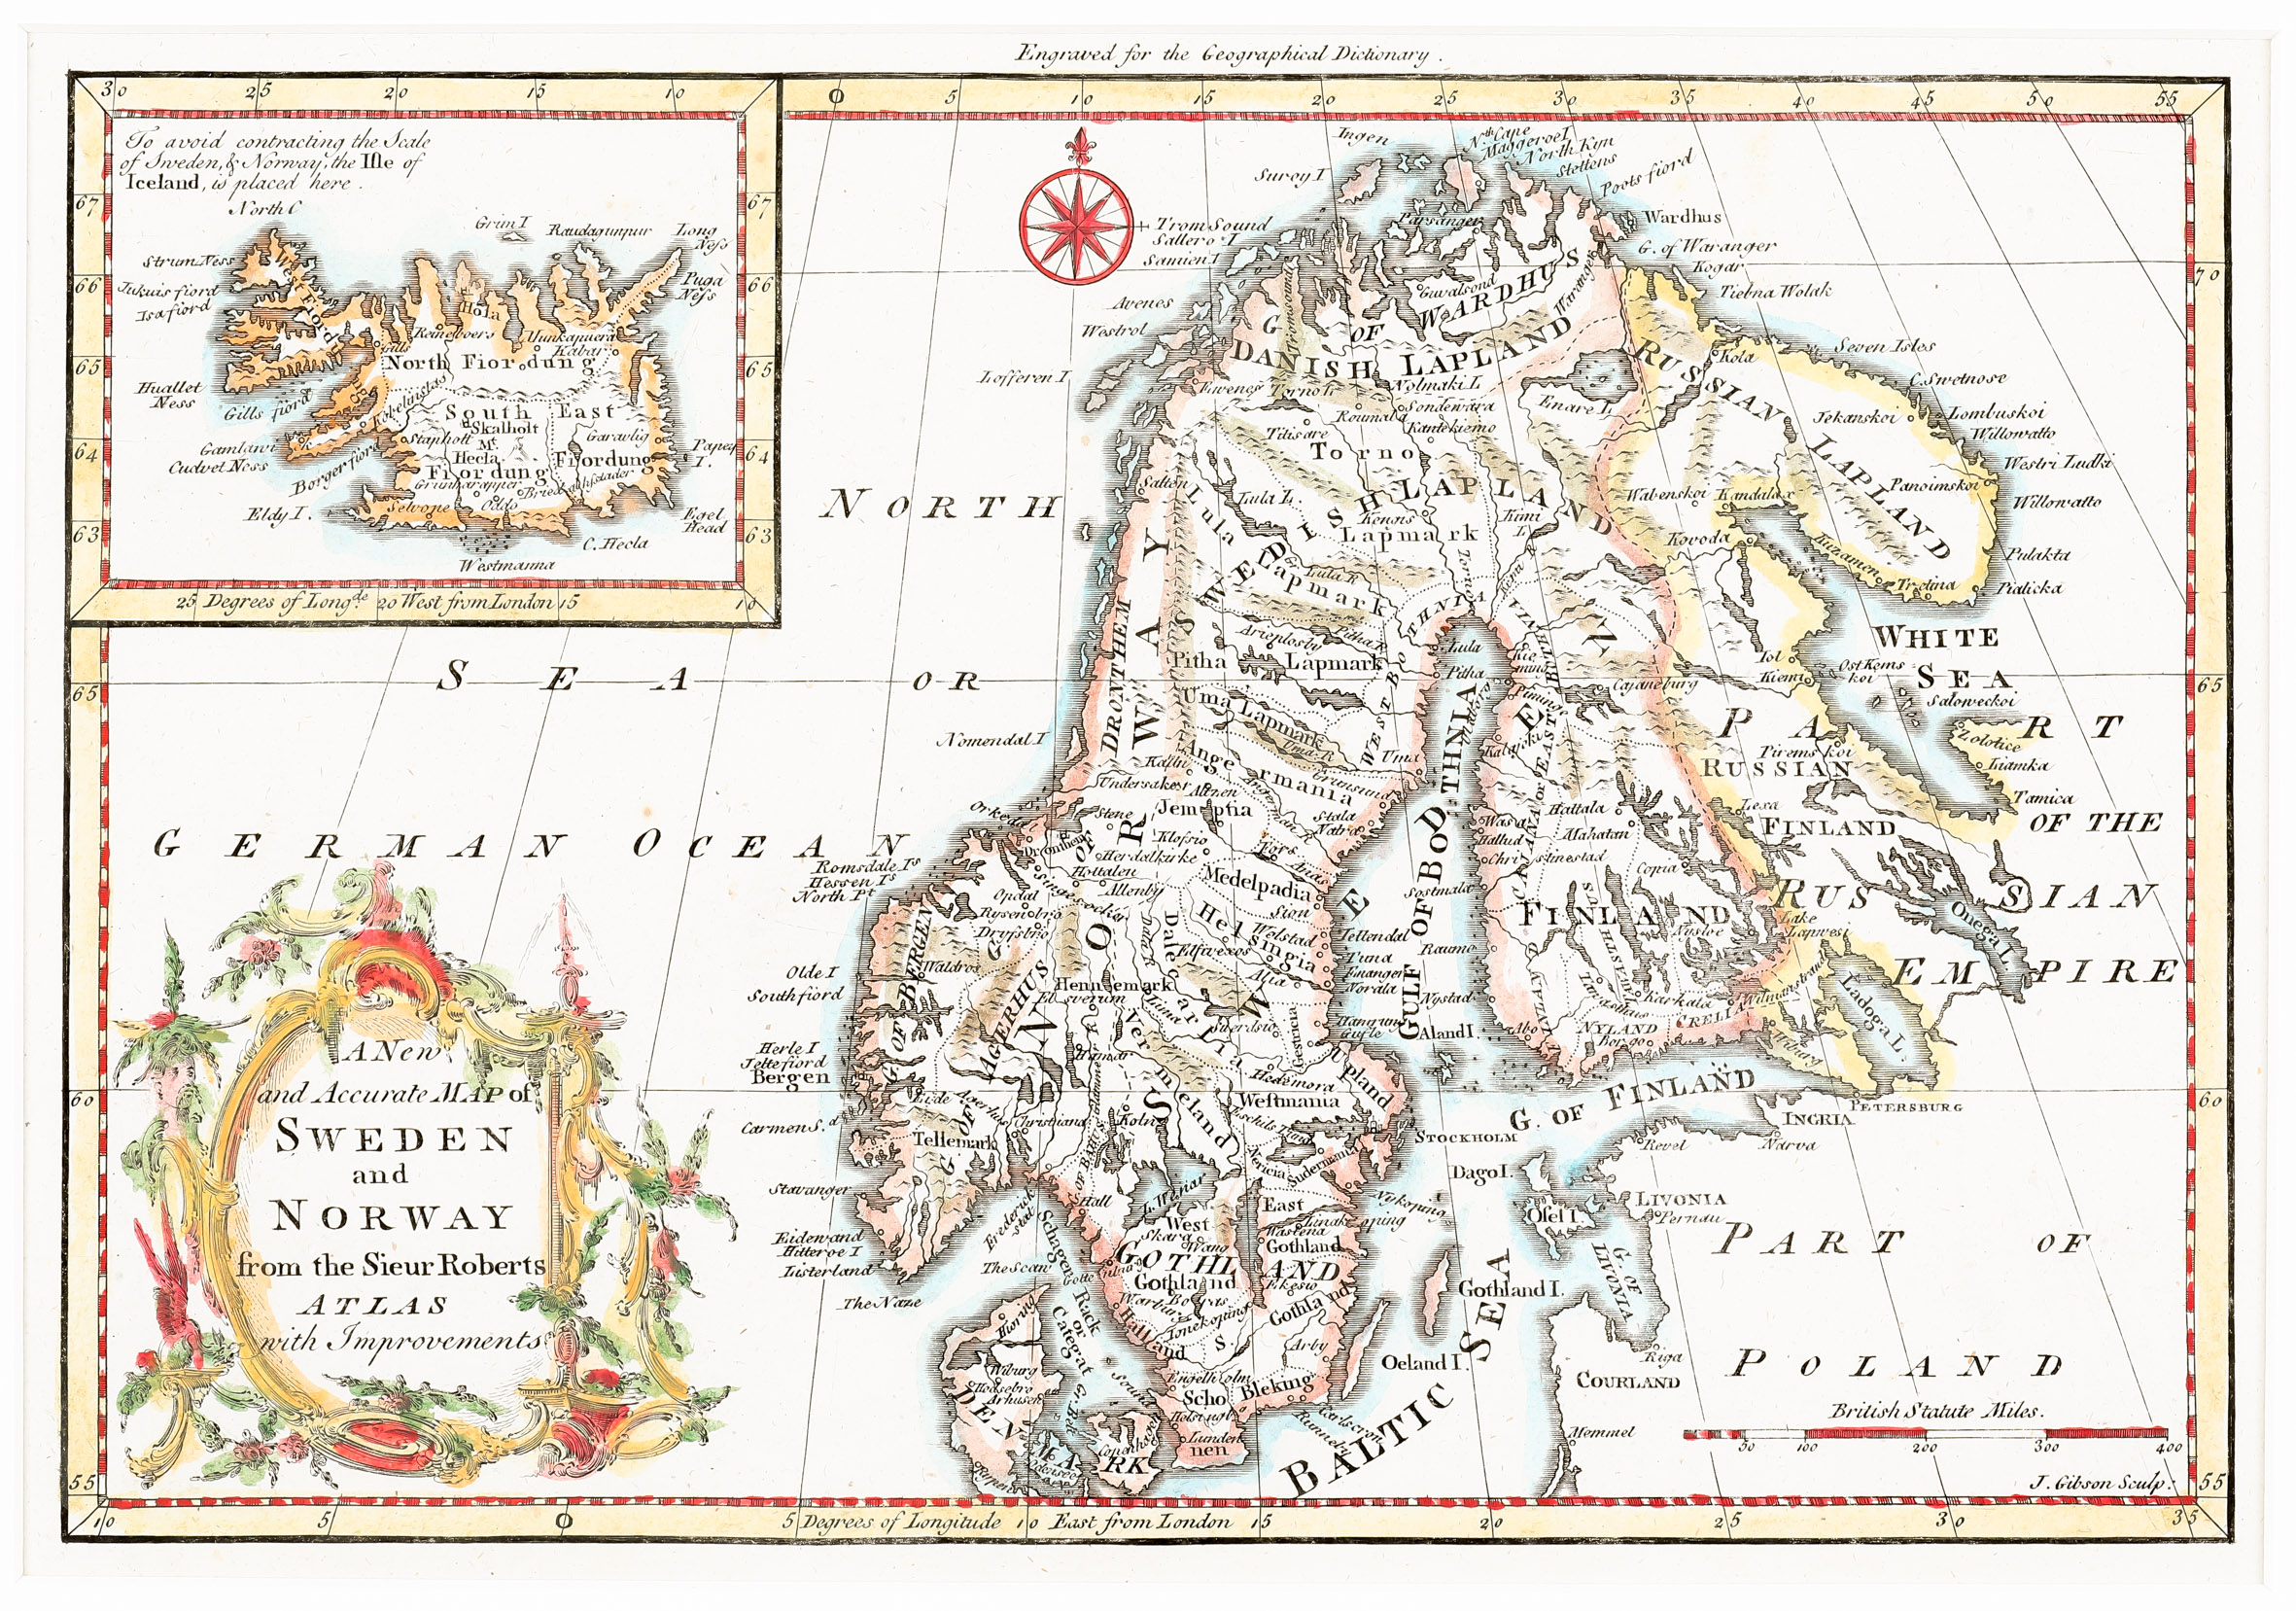 114. A New and Accurate Map of Sweden and Norway from the Sieur Roberts Atlas with Improvements